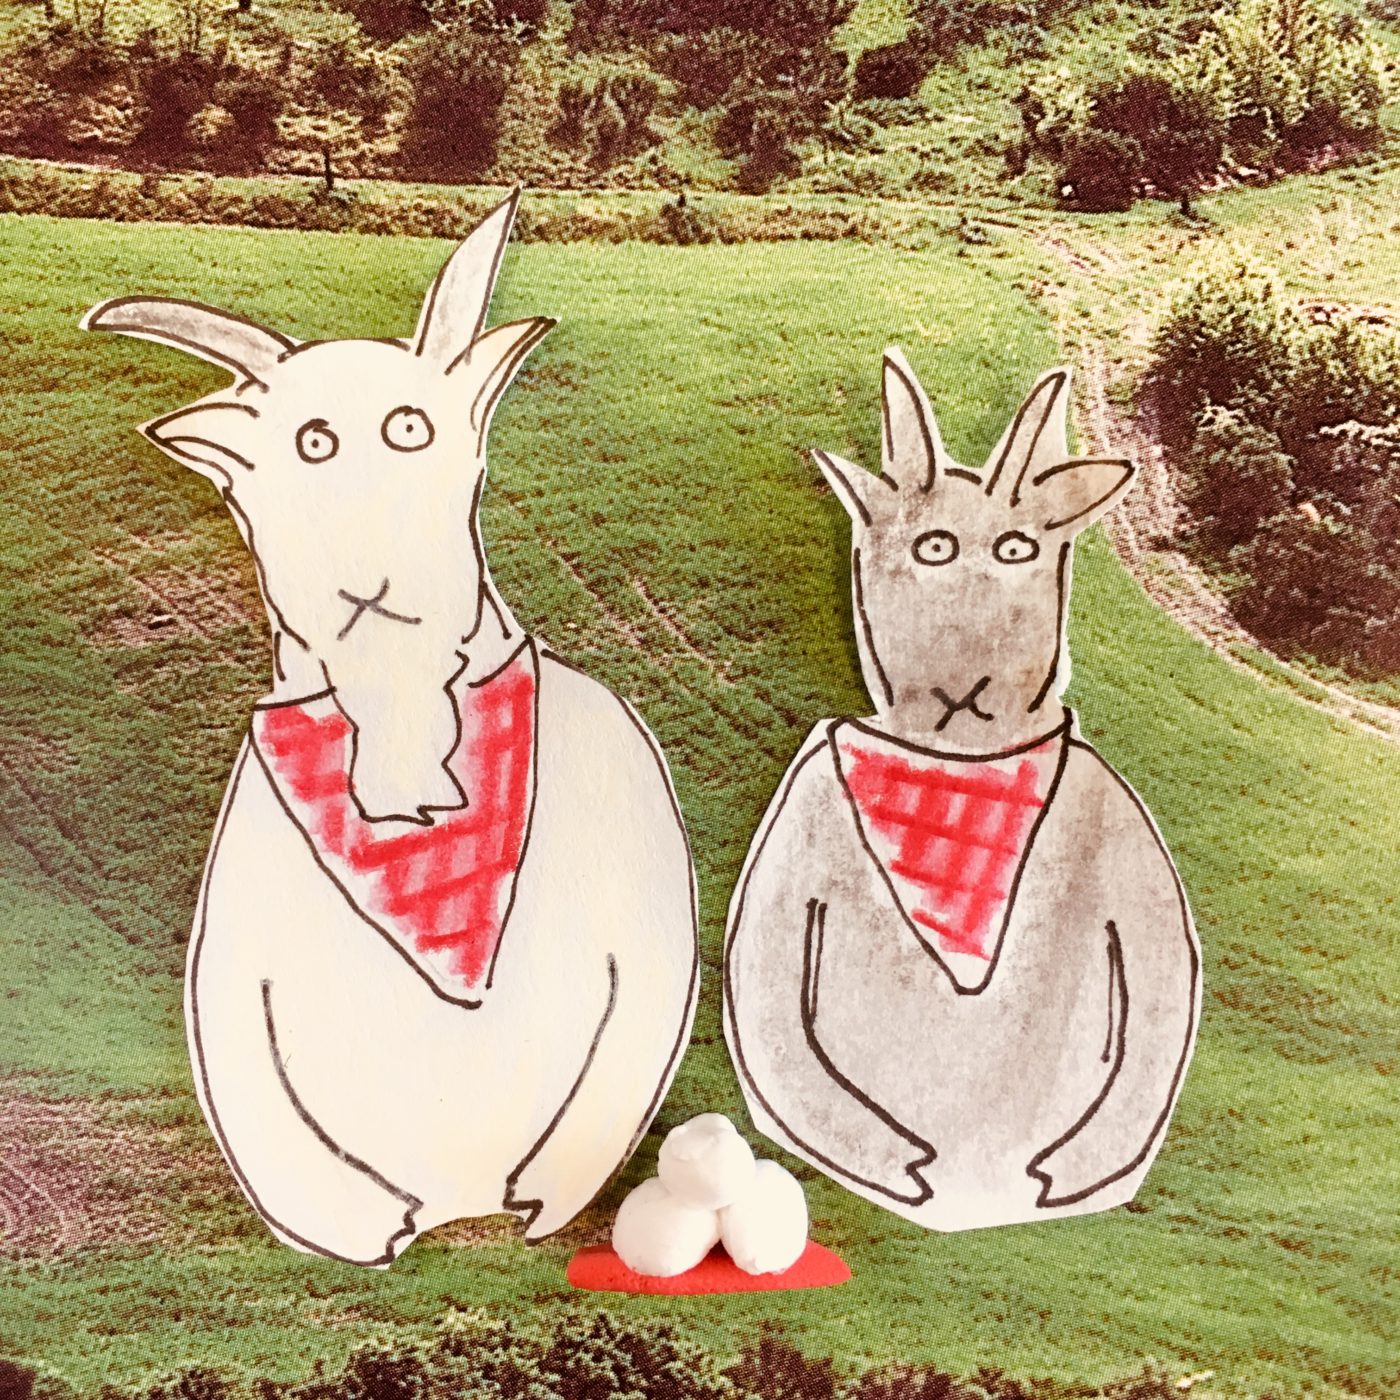 Image of two hand drawn goats wearing red bibs placed over a hill landscape with cheese in from of them